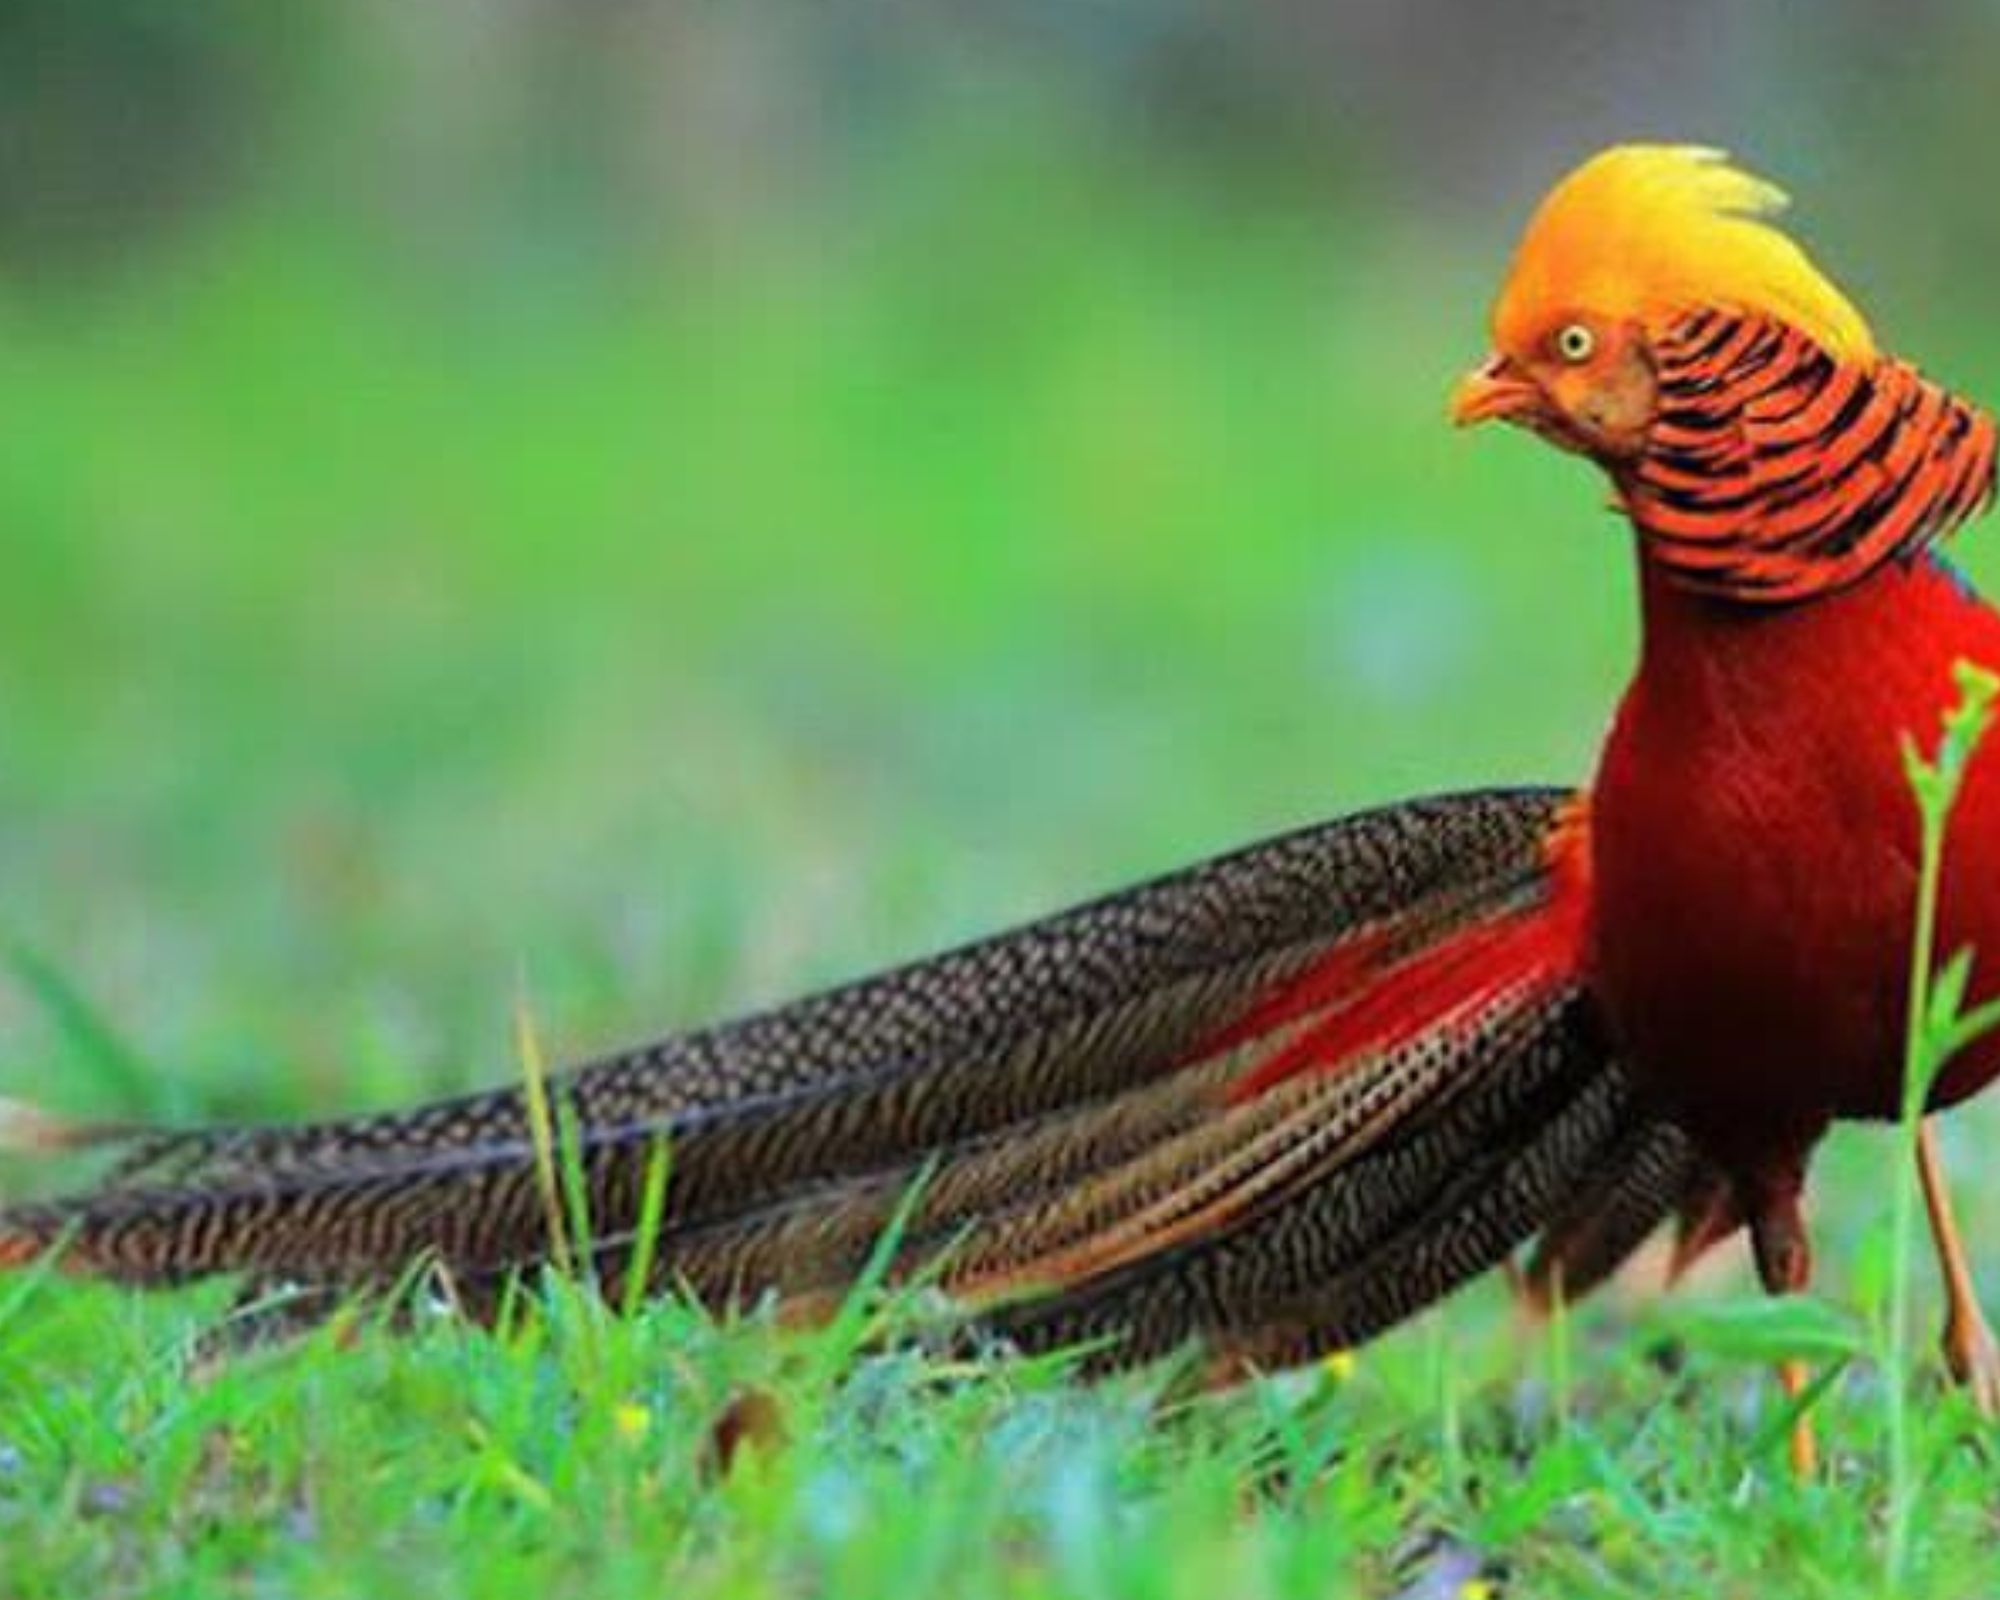 The Magnificent Five: A Fascinating Exploration of the World's Top 5 Birds